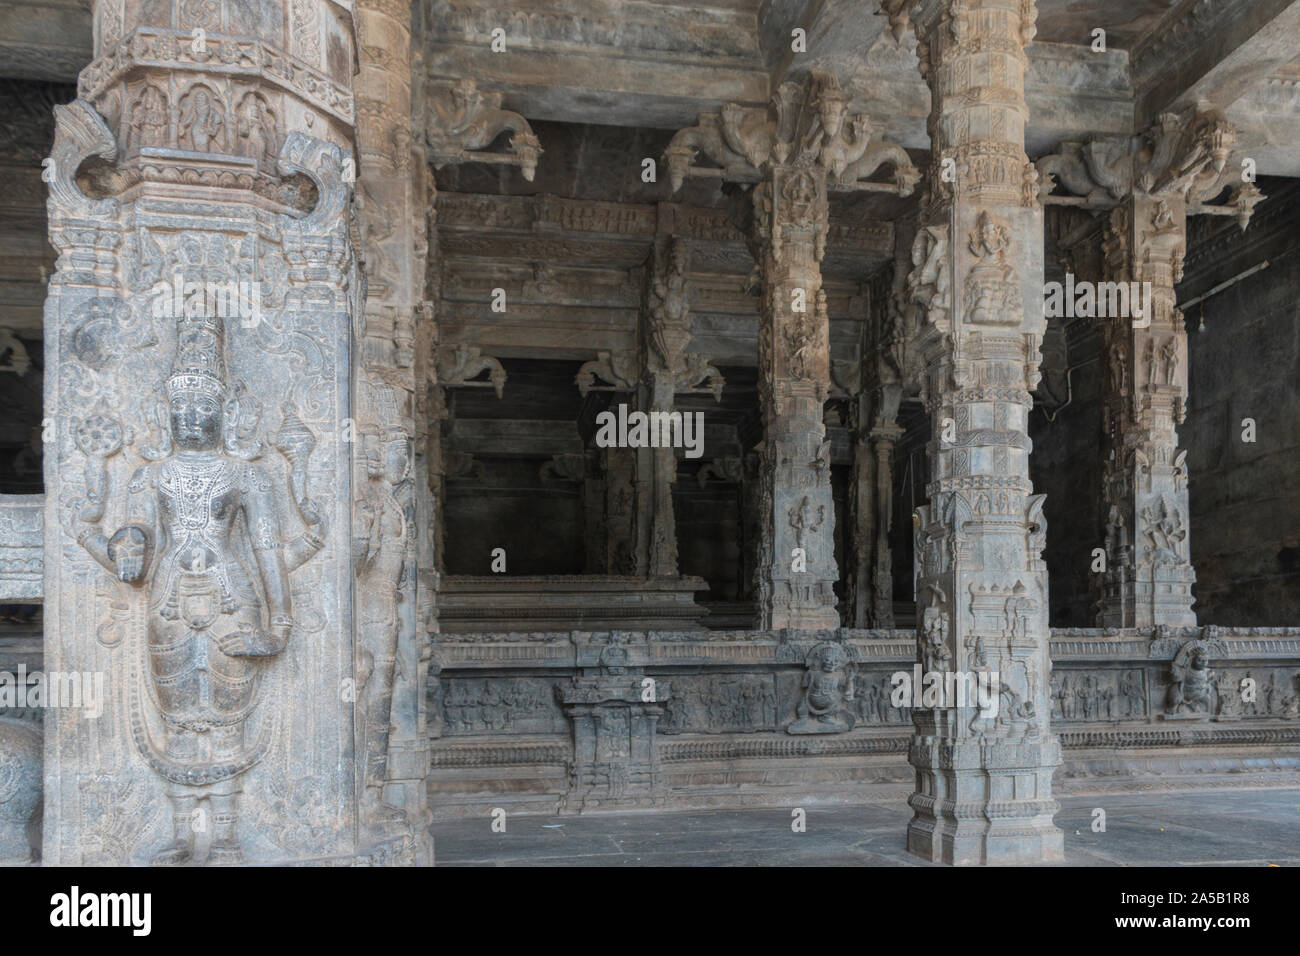 sculpted posts inside the fort Vellore temple with hindu divinities. looking at the darker inside. Vellore, India, September 2019 Stock Photo